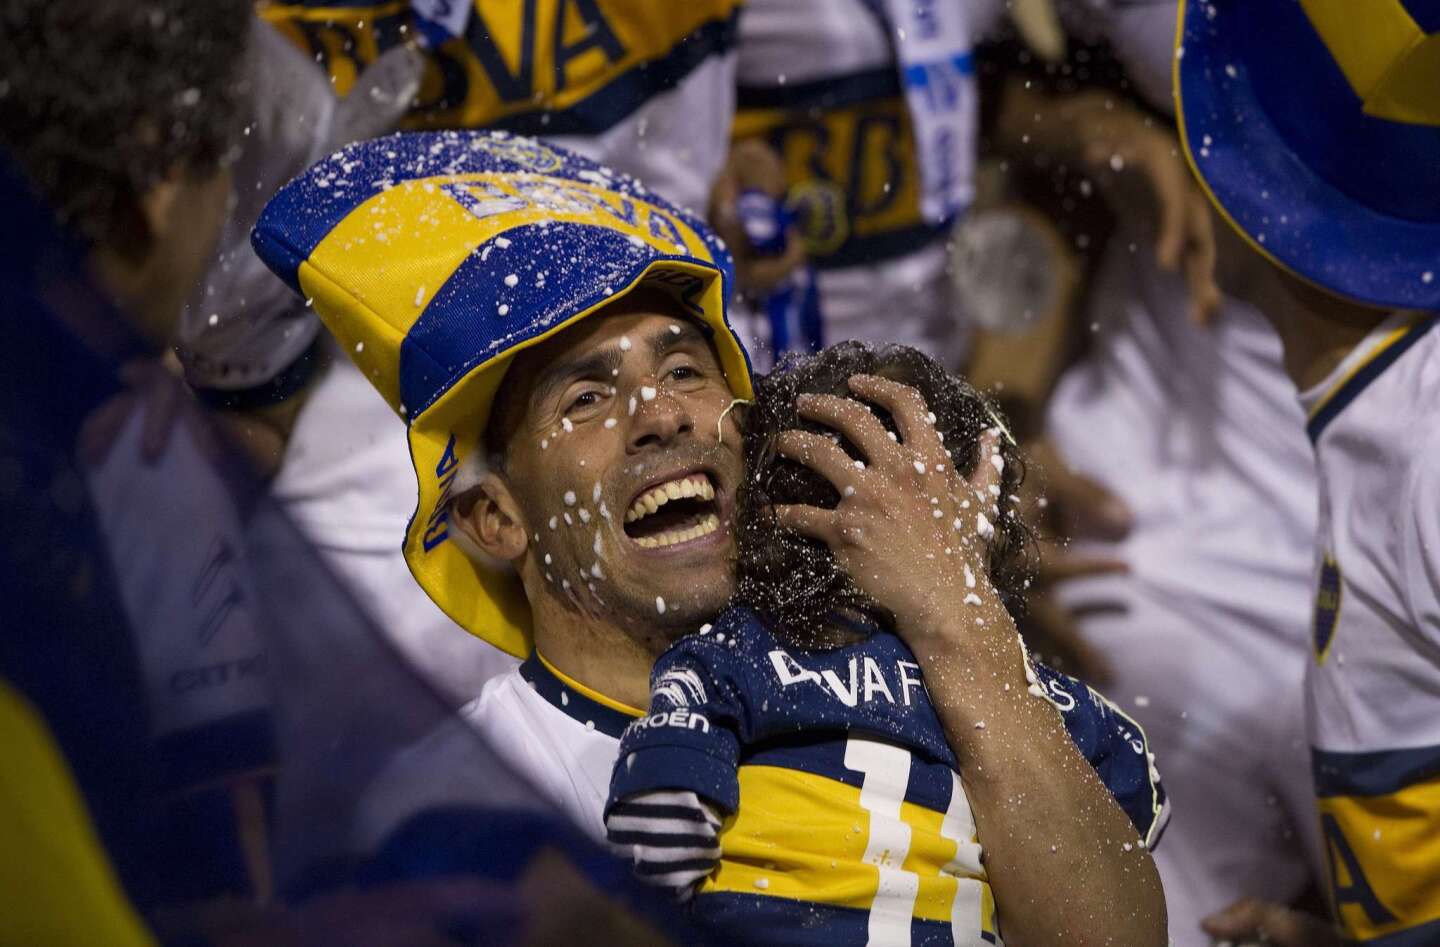 Boca Juniors' forward Carlos Tevez celebrates while holding his son after winning Argentina's first division football championship at the "La Bombonera" stadium in Buenos Aires, on November 1, 2015. AFP PHOTO / ALEJANDRO PAGNIALEJANDRO PAGNI/AFP/Getty Images ** OUTS - ELSENT, FPG, CM - OUTS * NM, PH, VA if sourced by CT, LA or MoD **